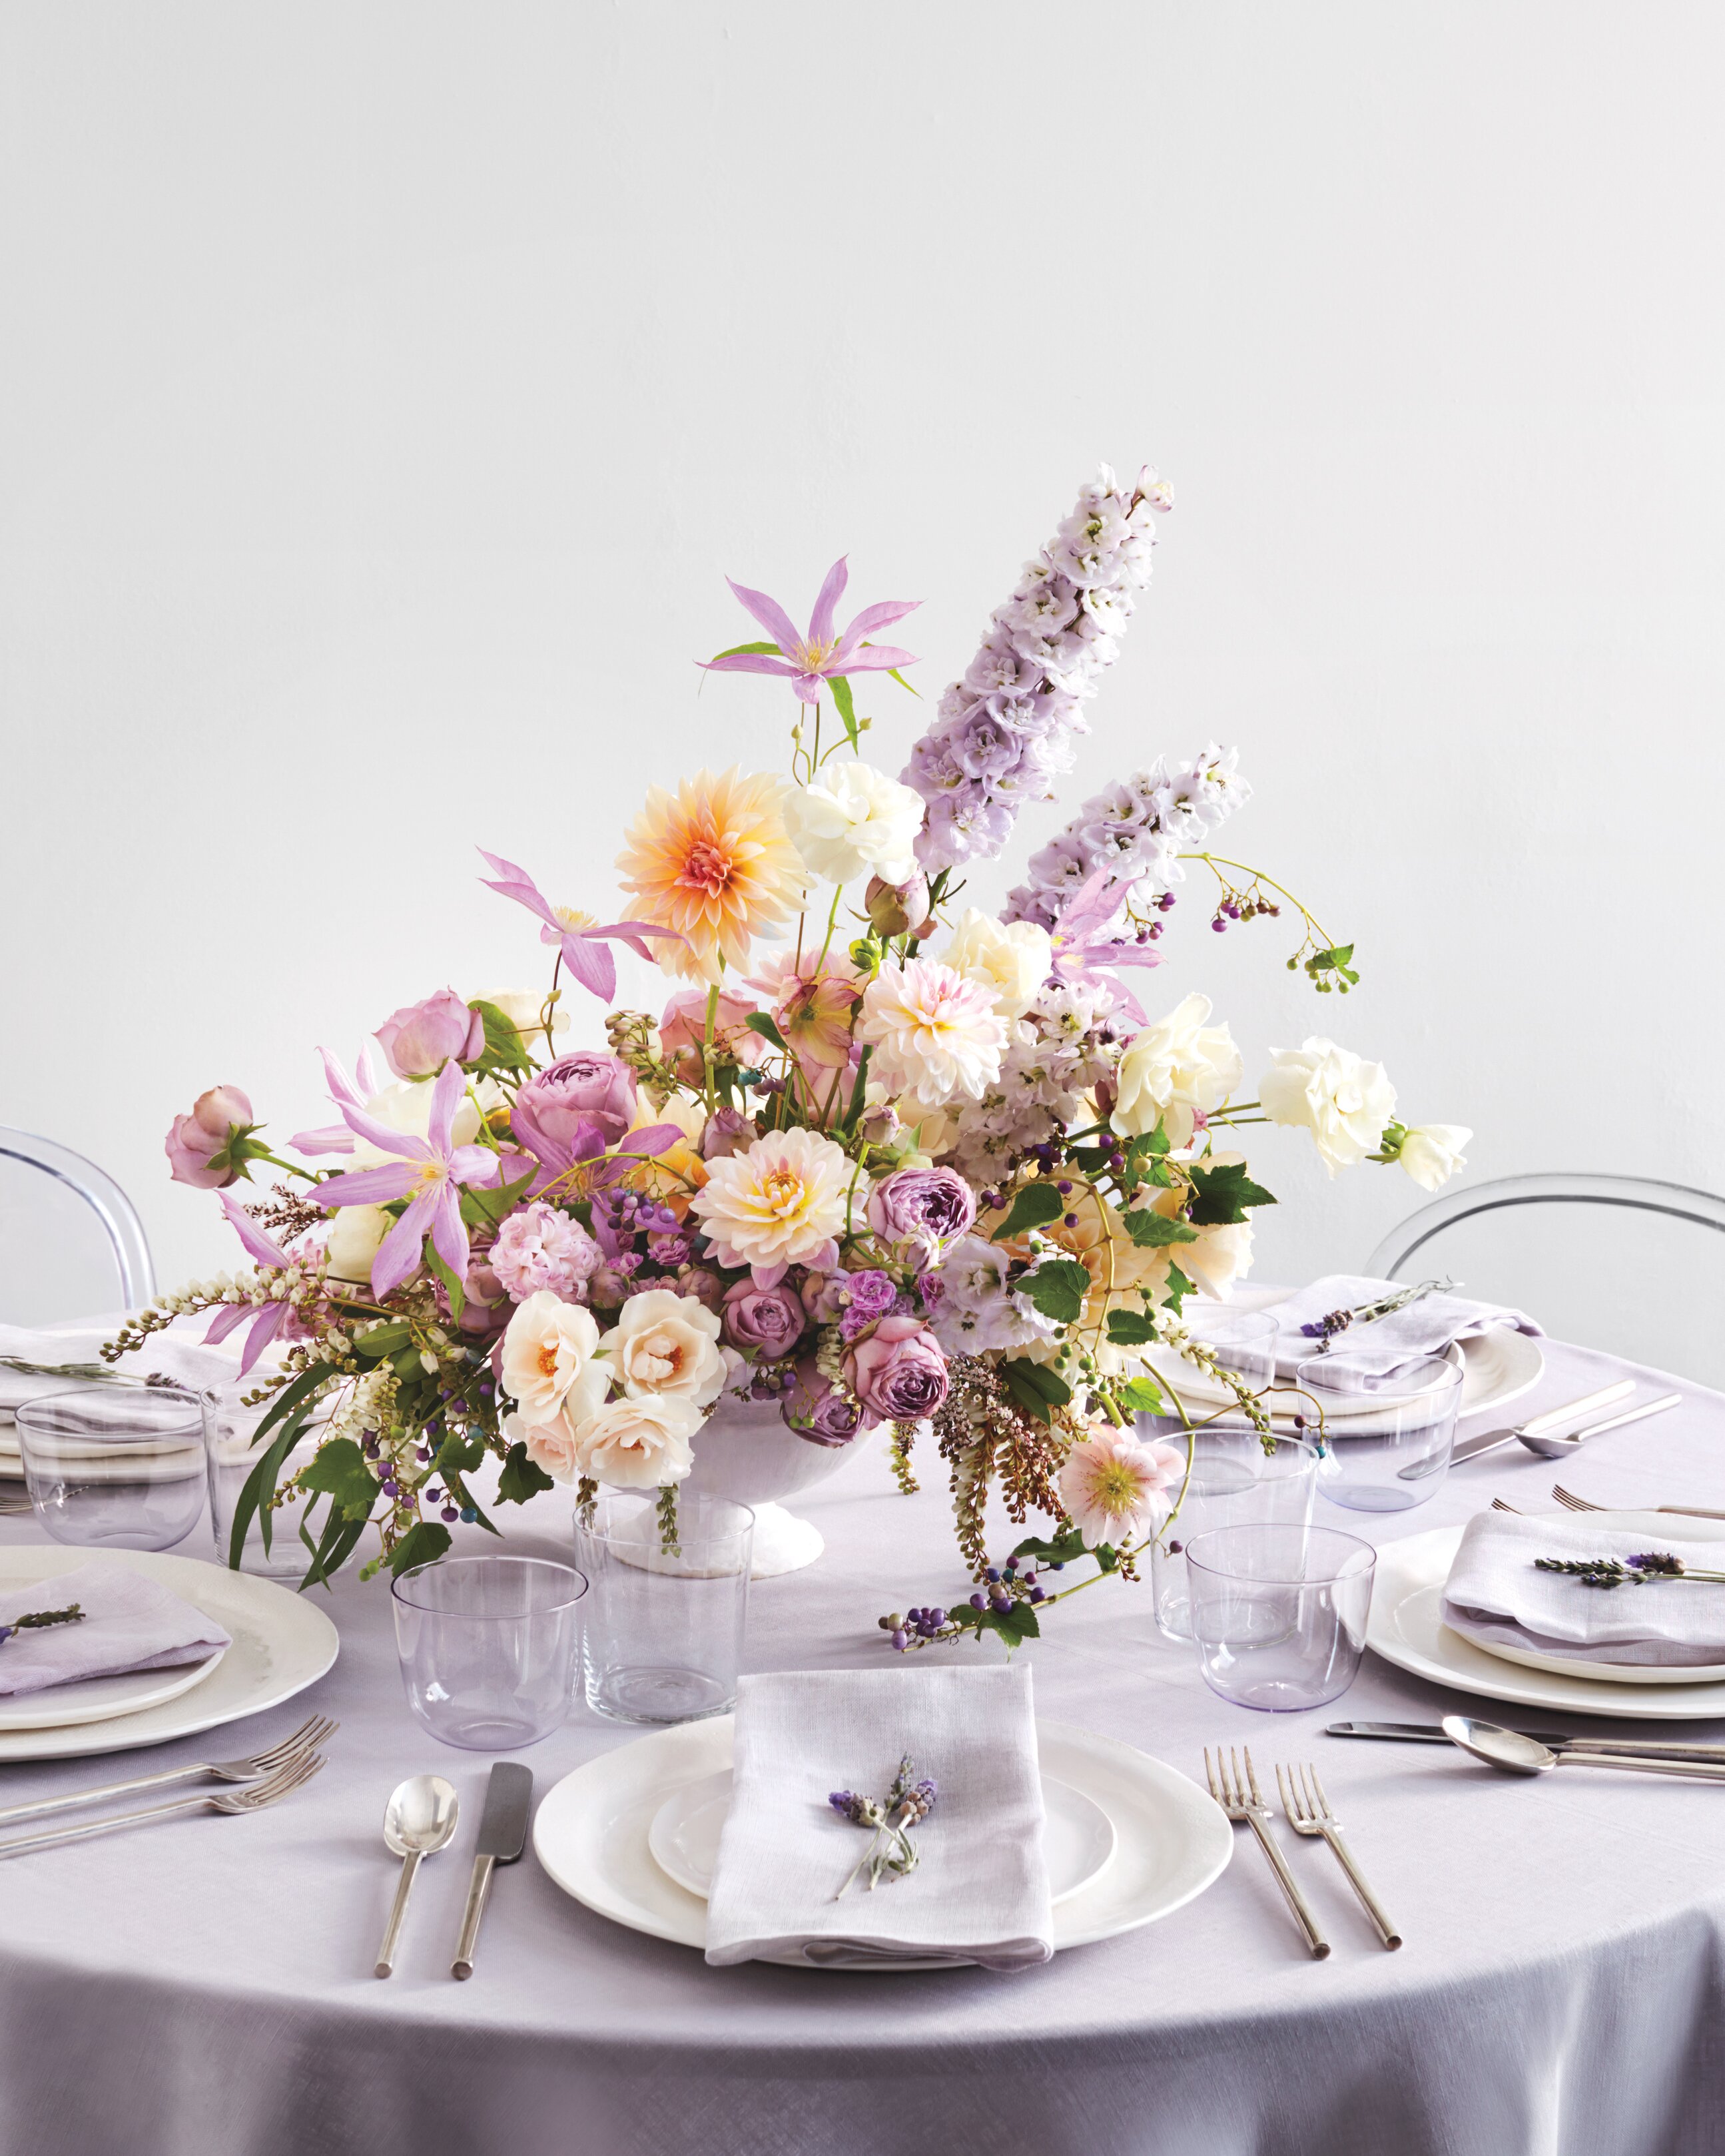 How To Diy Plaster Dipped Vessel Centerpieces Martha Stewart